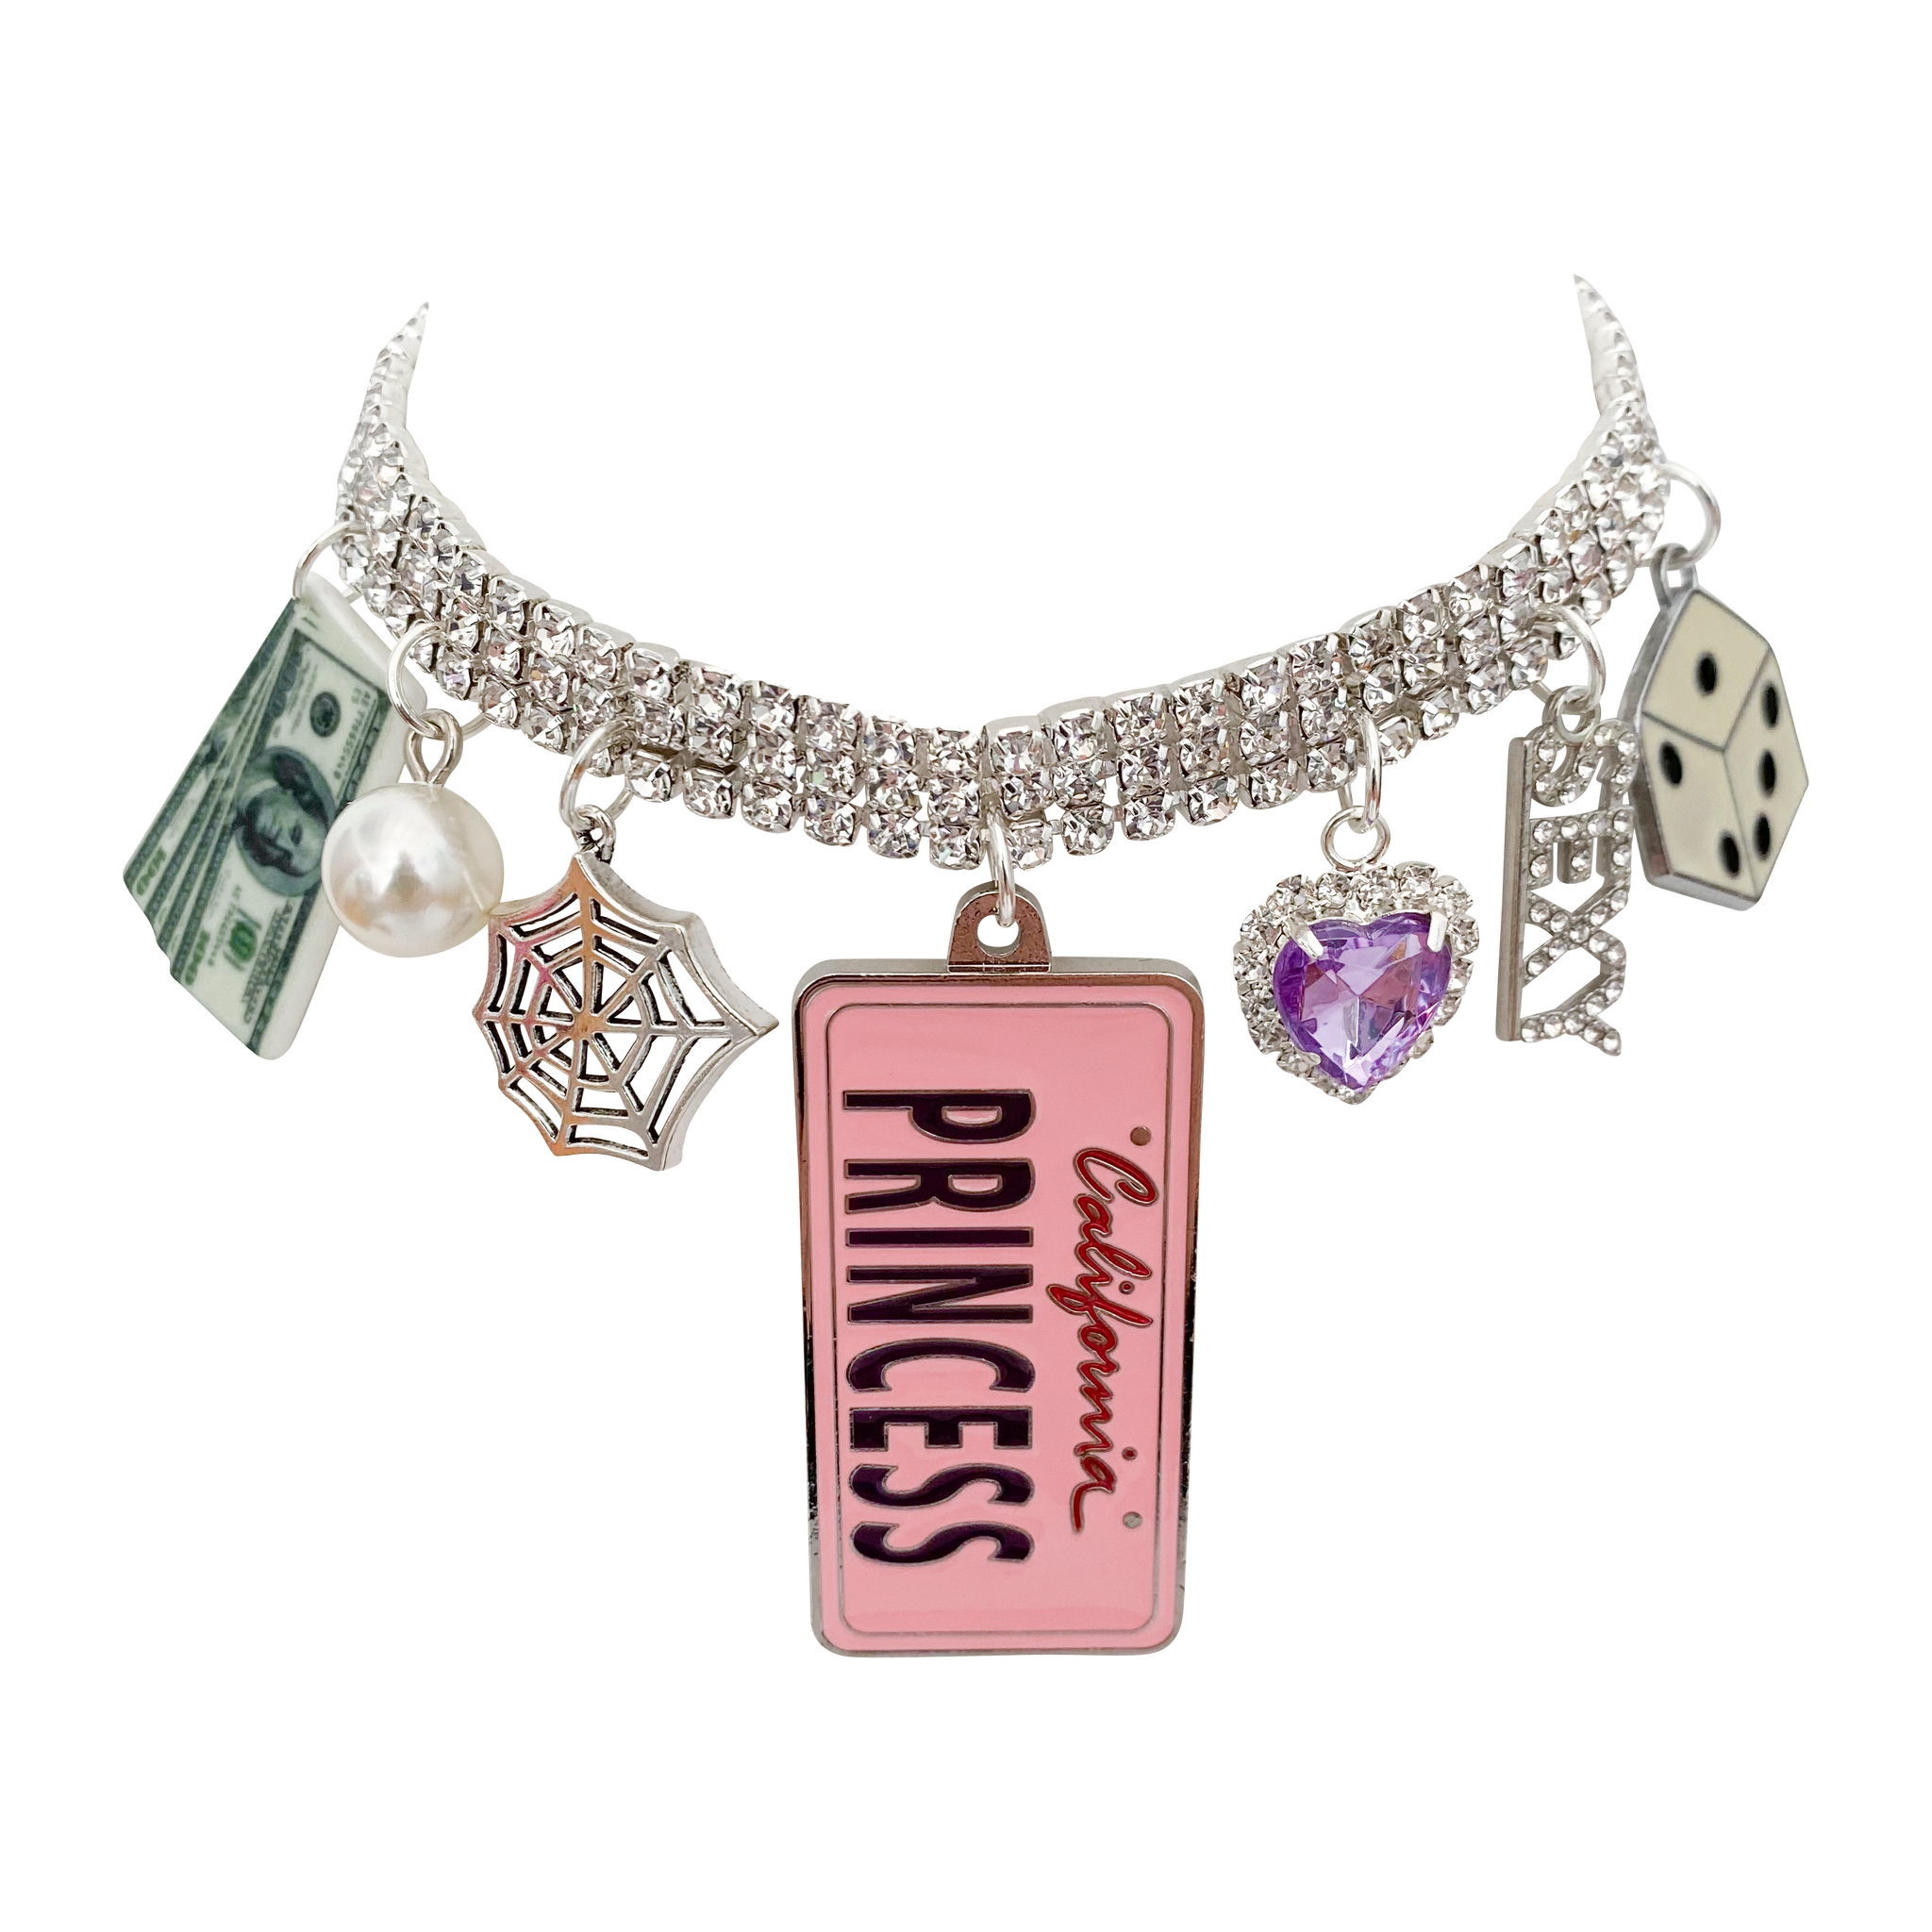 Hollywood Princess Charm Necklace